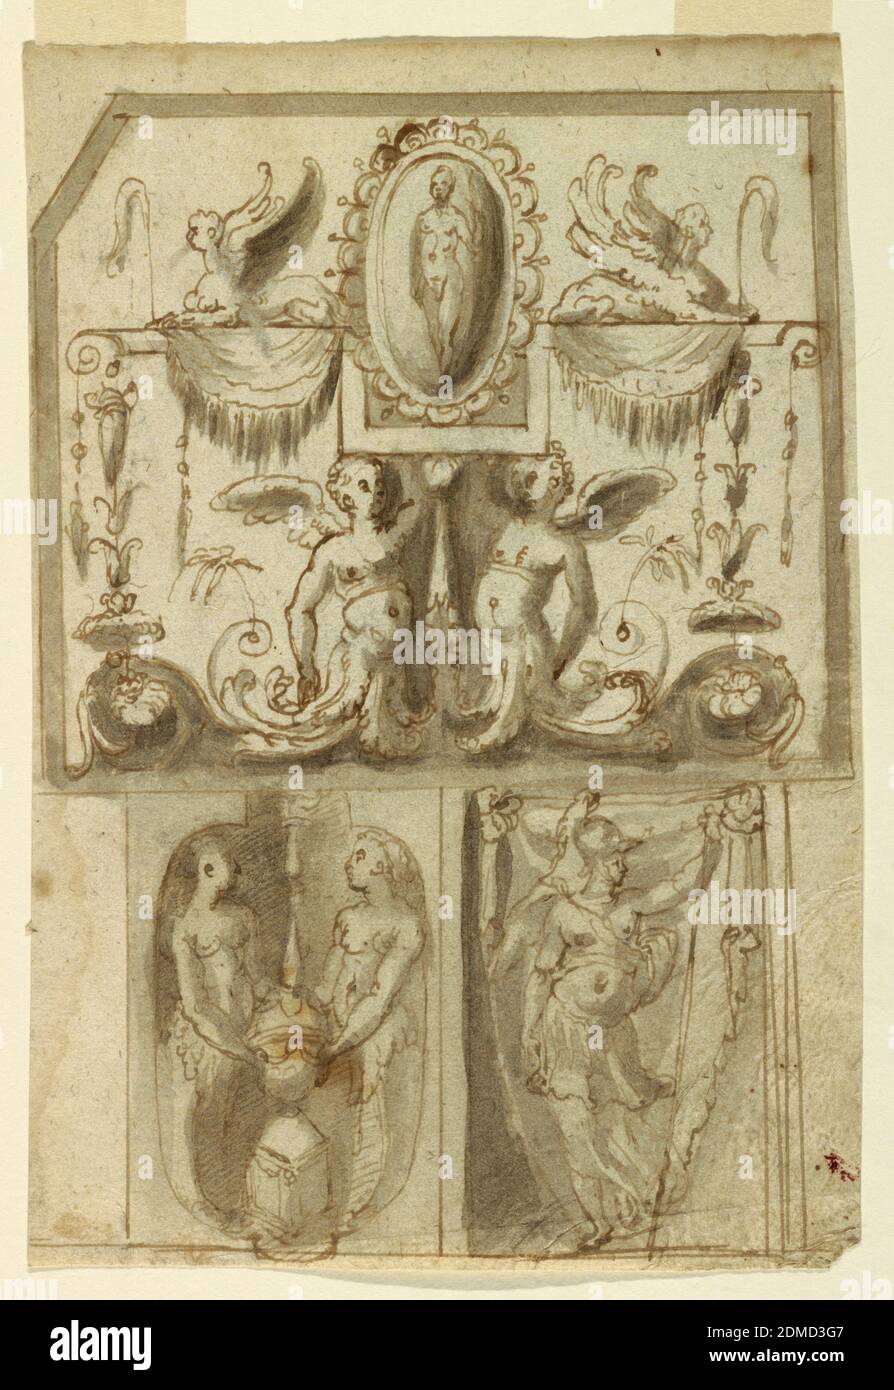 Design for the Painted Decorations of Three Panels, Pen and brown ink, brush and grey wash, black chalk on laid paper., Vertical rectangle with three panels. Above is a horizontal oblong with a bevelled upper left corner. The half-figures of two children carry a lath, the central part forms one half of an oblong, in which stands a framed cameo. Beside the cameo, sit two crouched sphinxes. Below, at left, is a vertical oblong with a niche-like quatrefoil. Two female half-figures stand beside a lit candelabrum. Below, at right, is a niche with a figure carrying a spear in left hand., Italy, 1580 Stock Photo